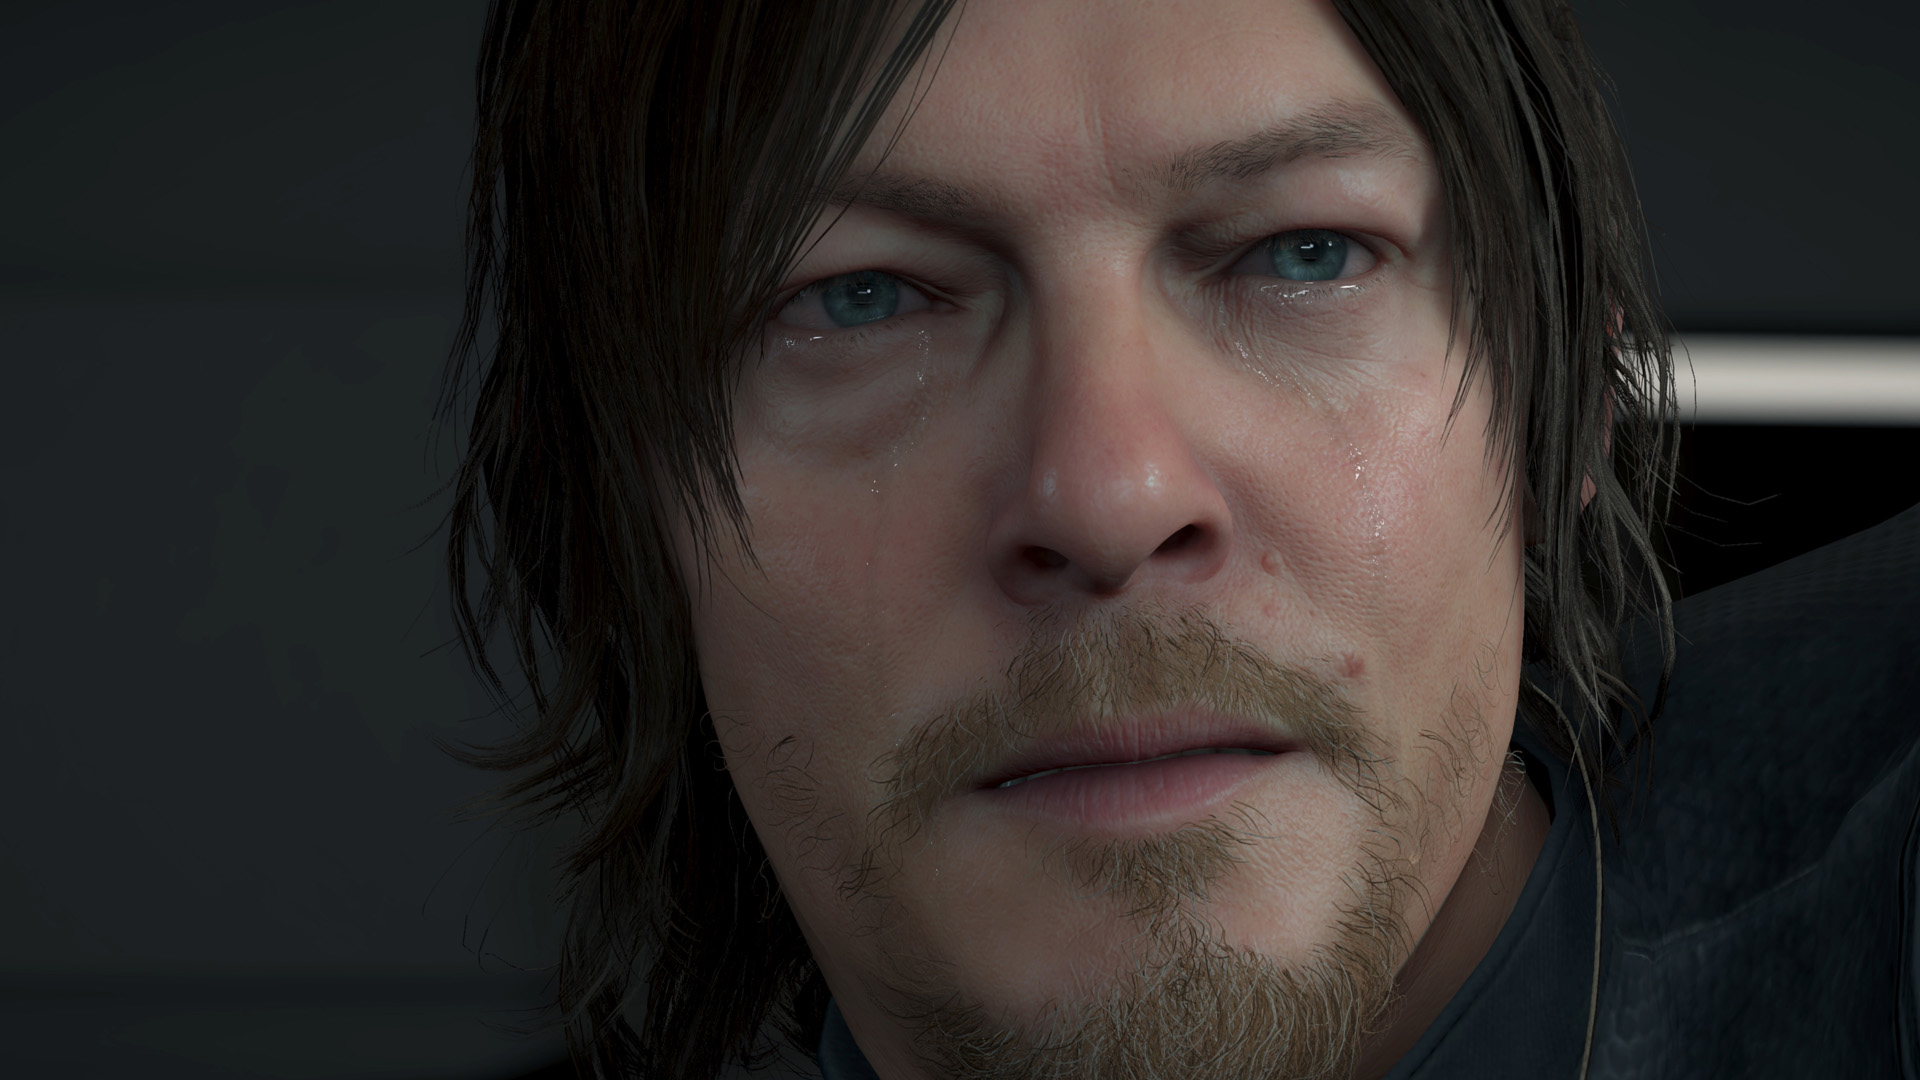 Death Stranding Director's Cut Cross-Saves And PS4 Upgrade Detailed